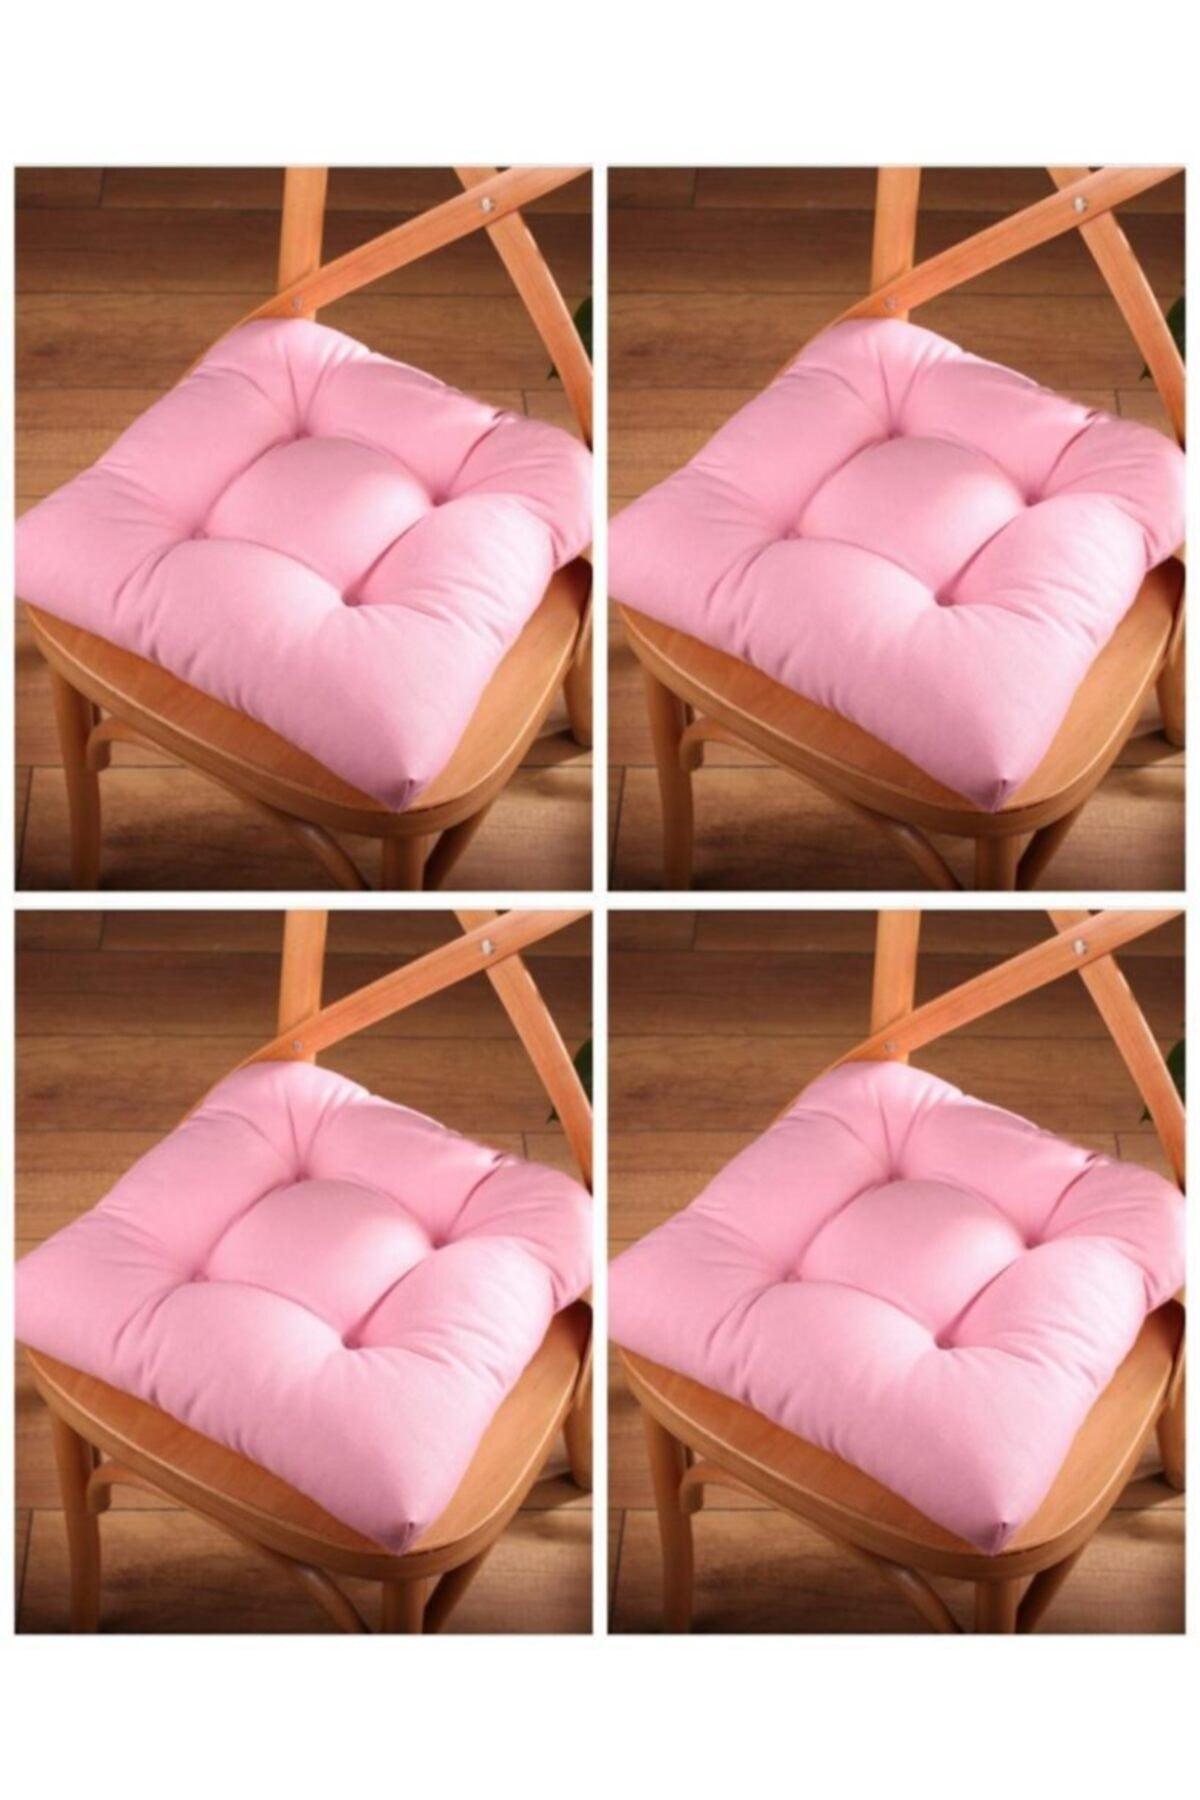 4 Lux Pofidik Pink Chair Cushion Special Stitched Laced 40x40cm - Swordslife